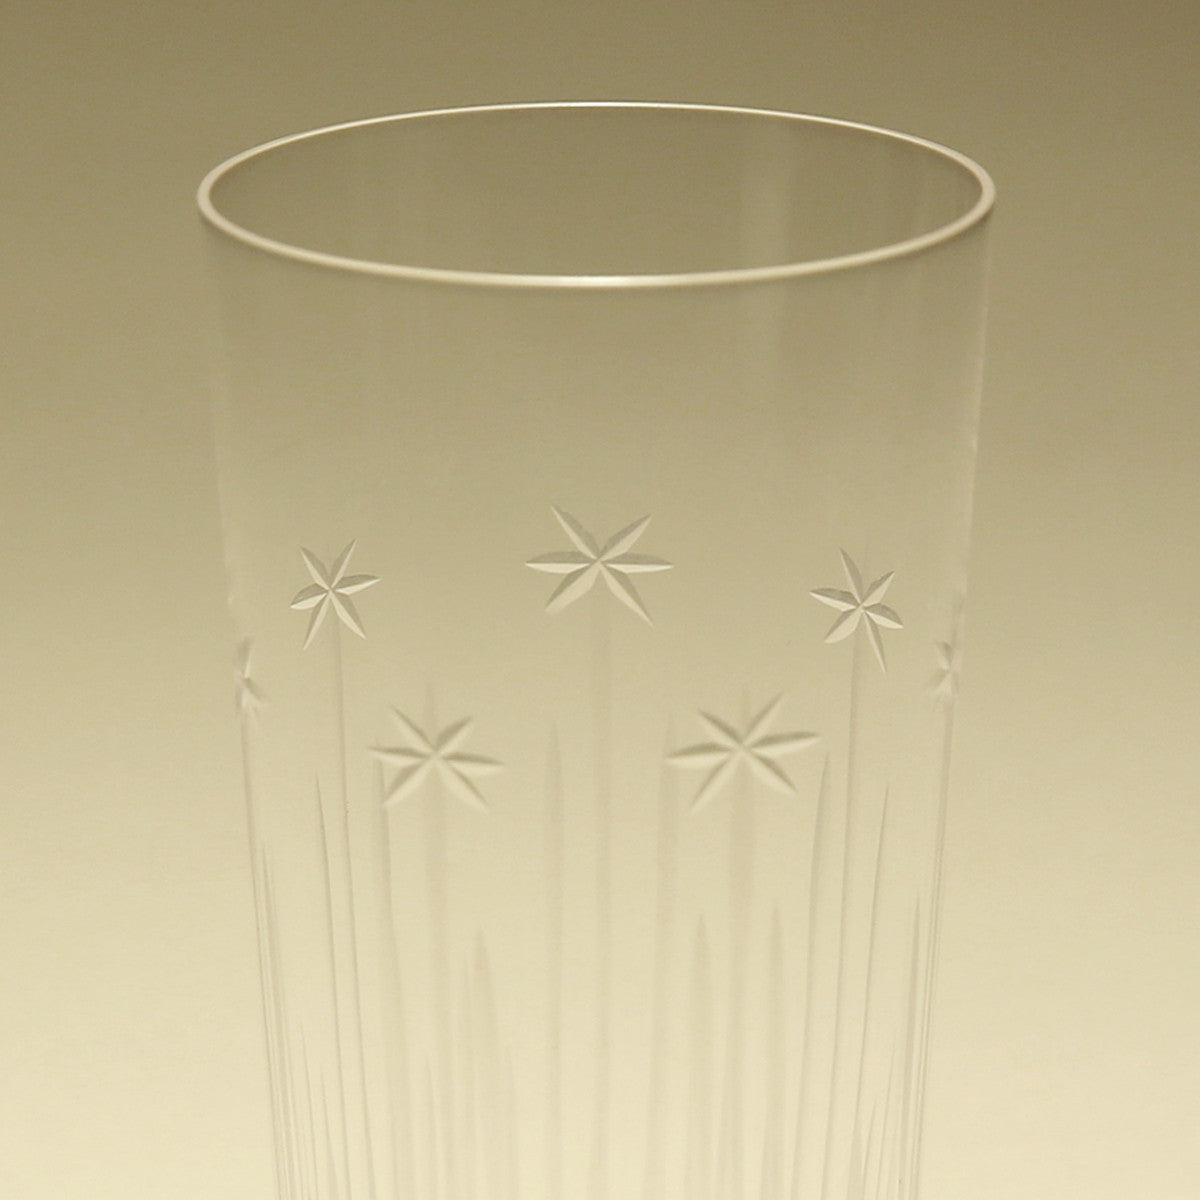 Etched Drinking Glass